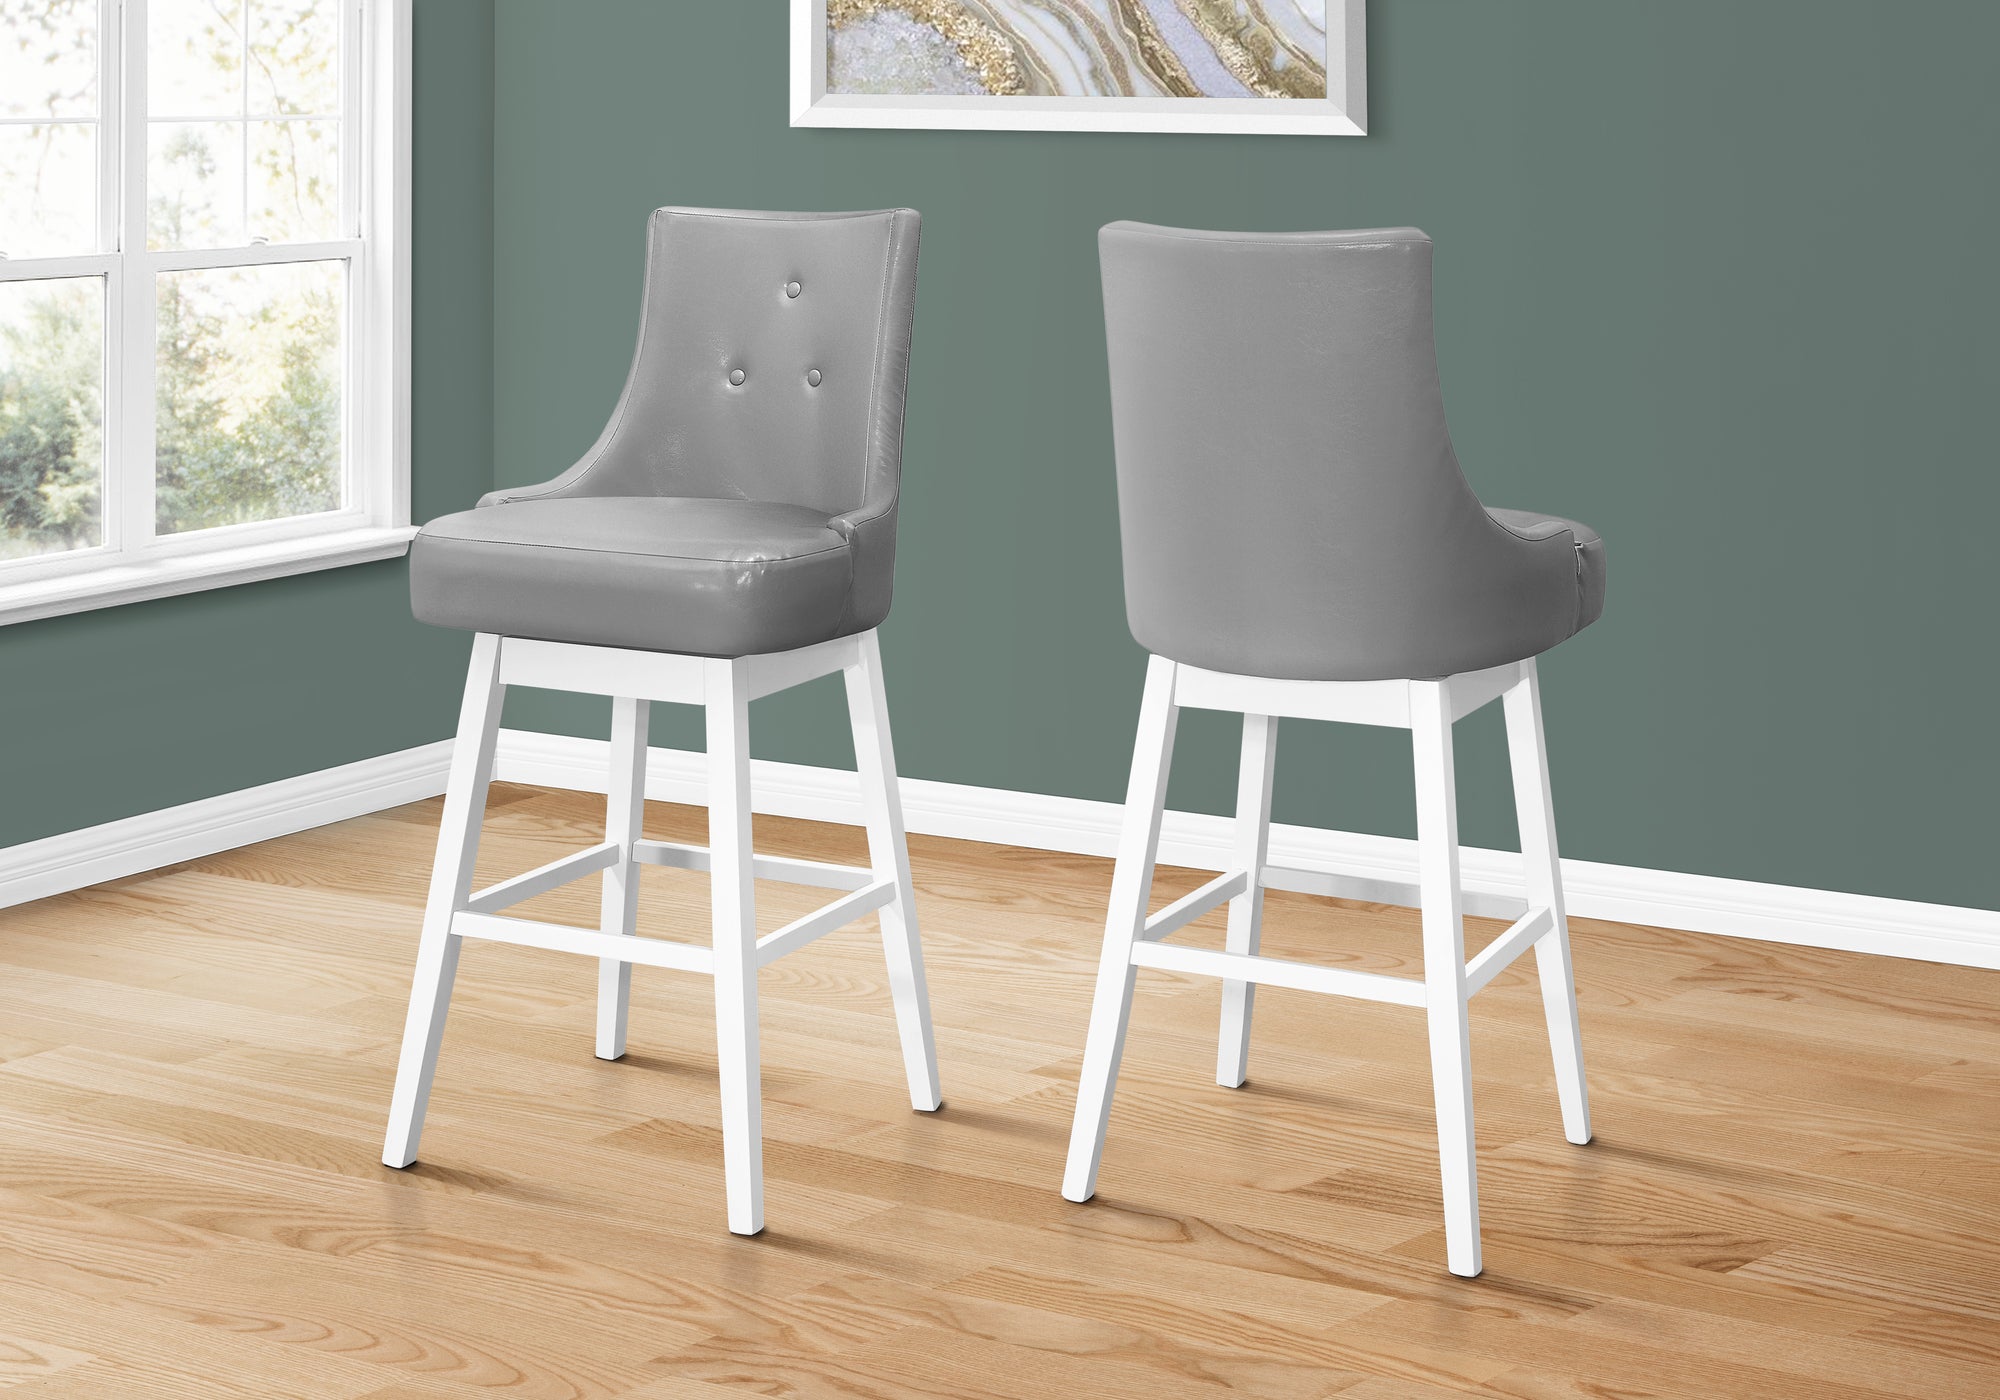 MN-151243    Bar Stool, Set Of 2, Swivel, Bar Height, Solid Wood, Leather Look, Grey, Transitional